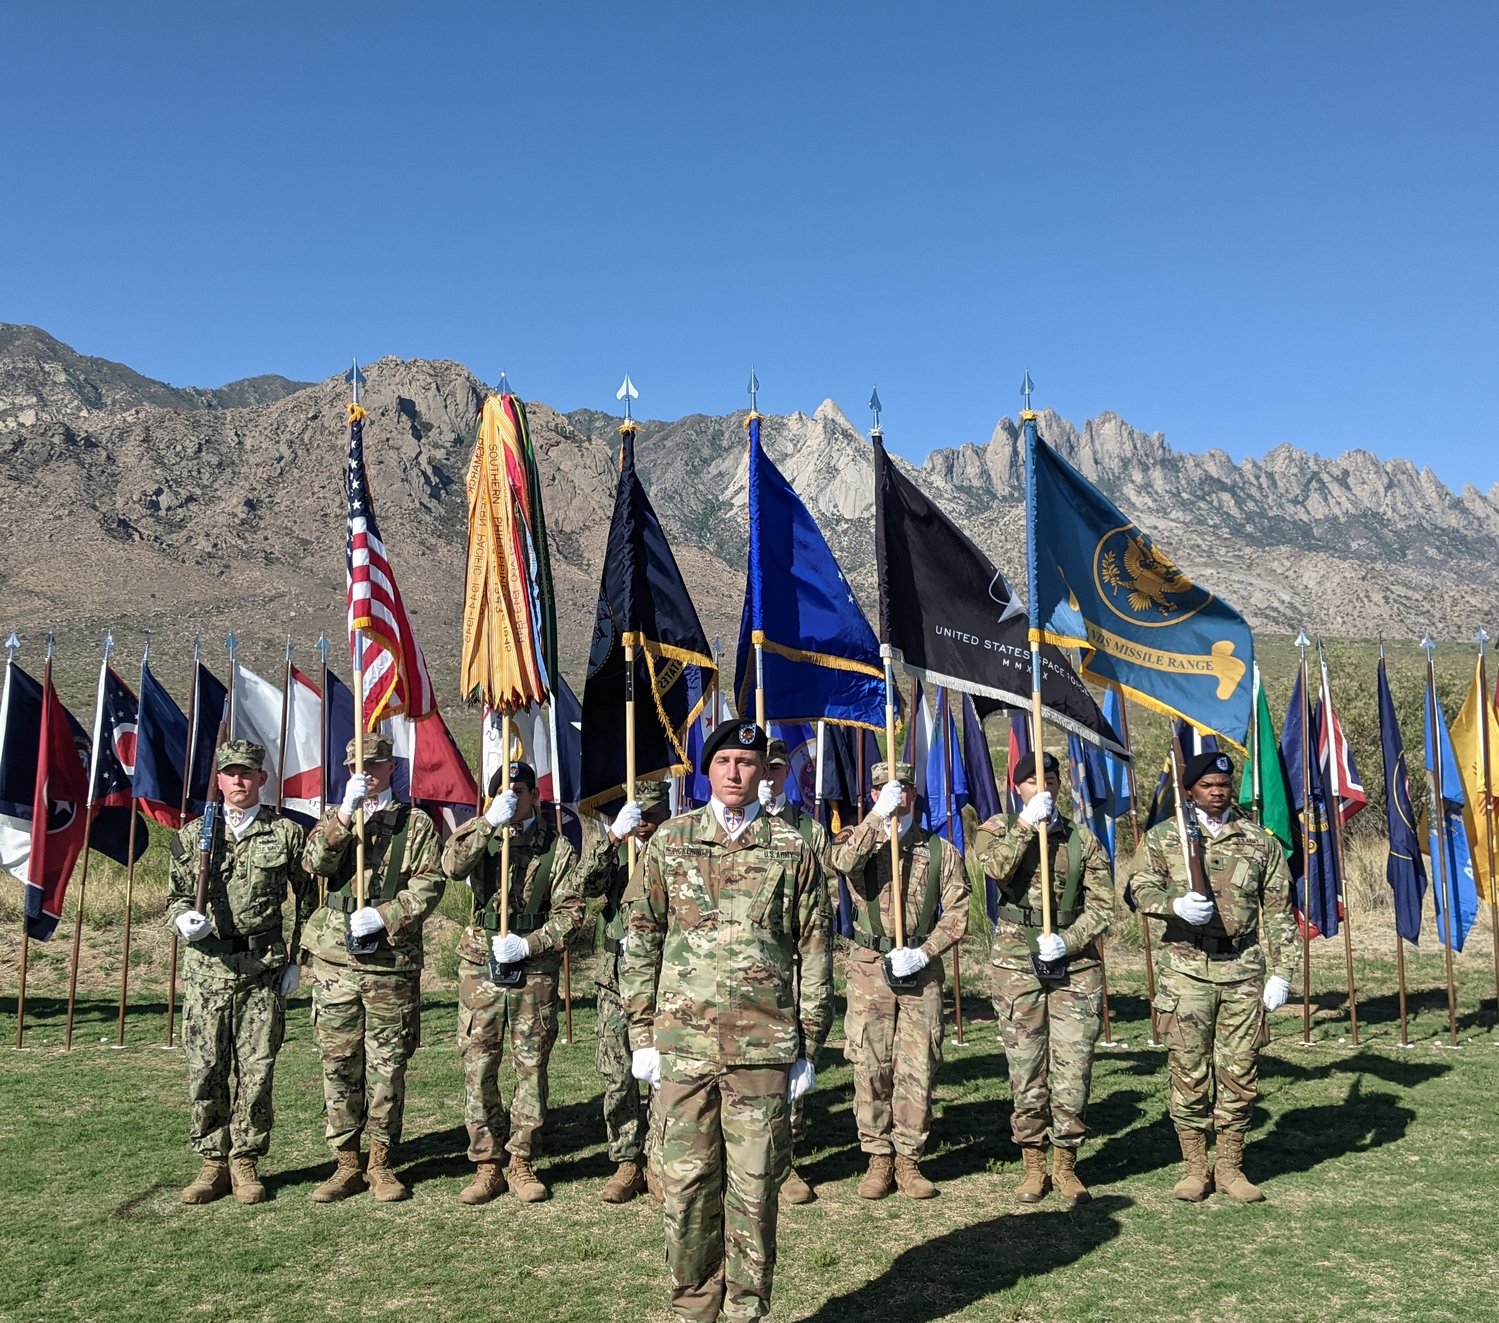 White Sands Missile Range gets a new commanding general Las Cruces